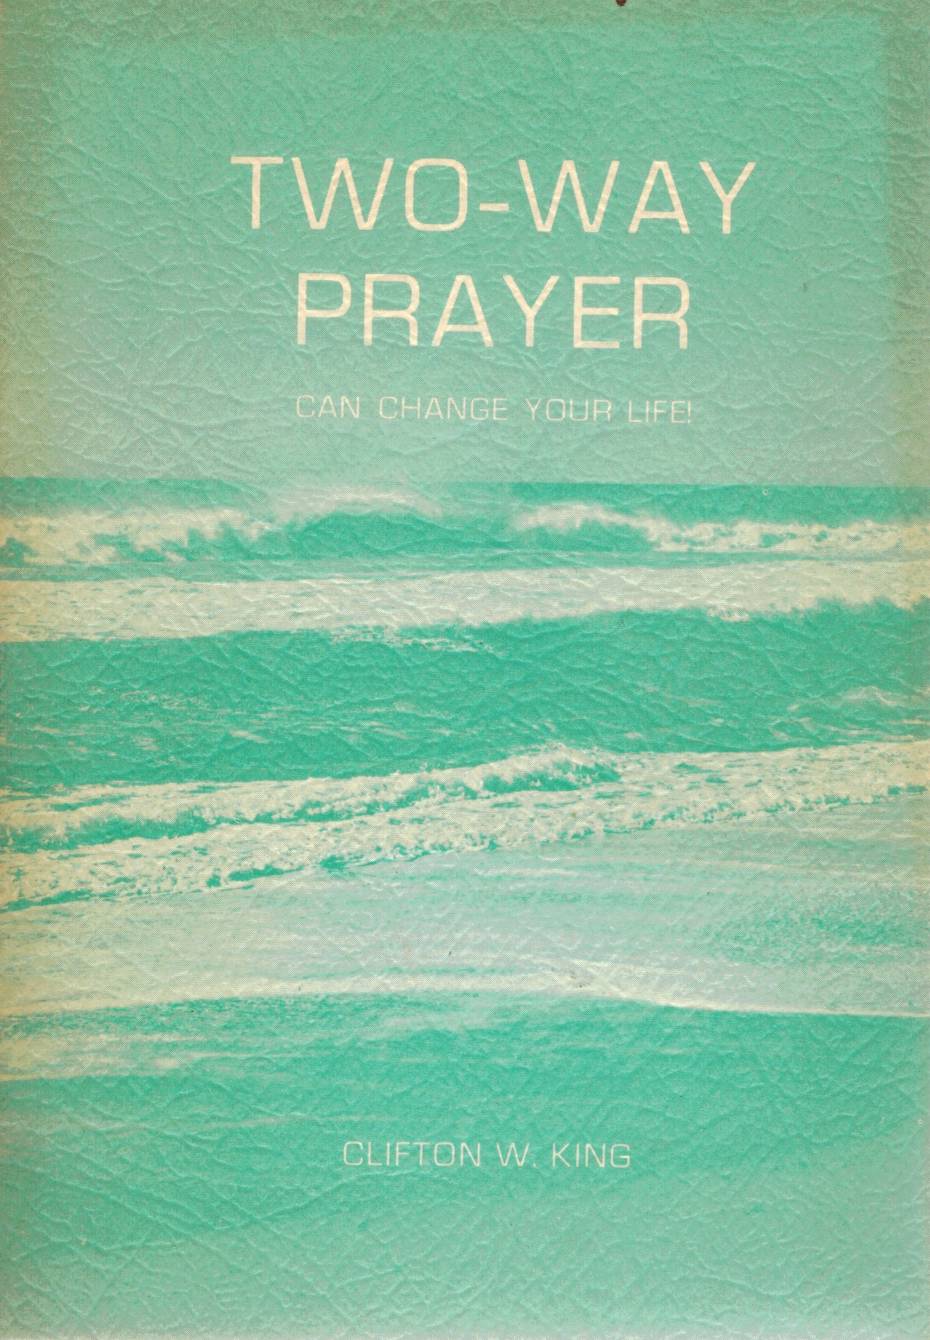 Two-way prayer can change your life